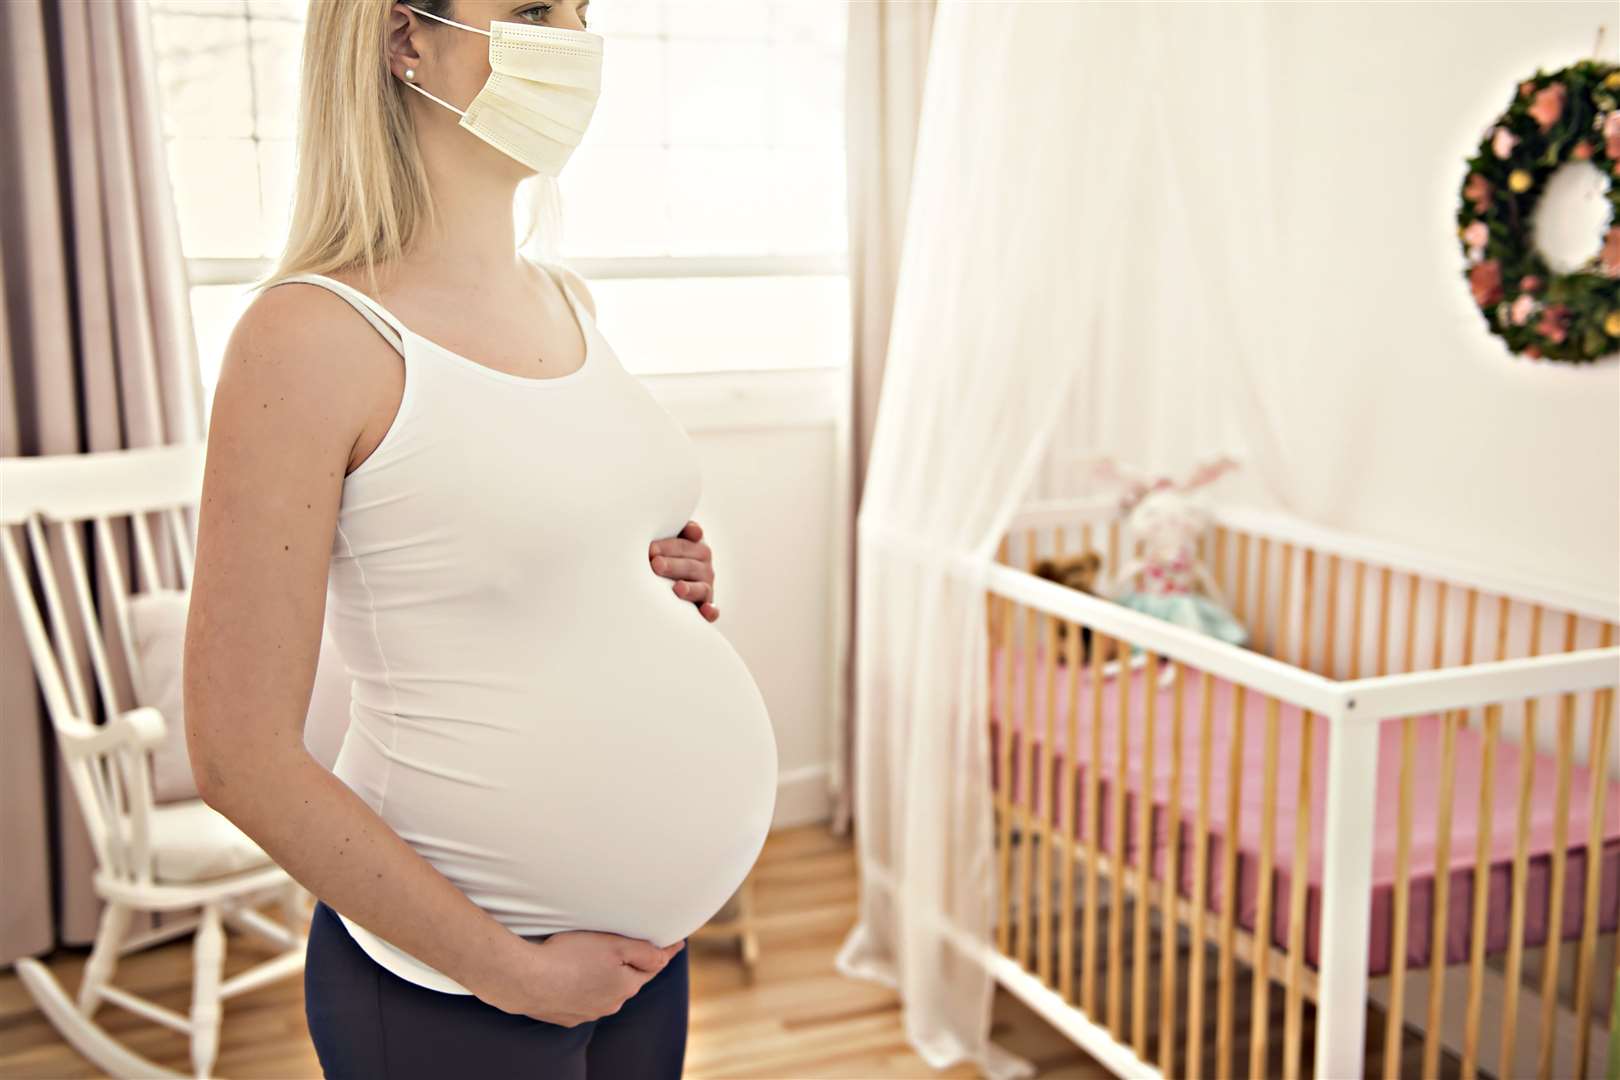 A pregnant woman use surgical mask close her mouth and nose at home